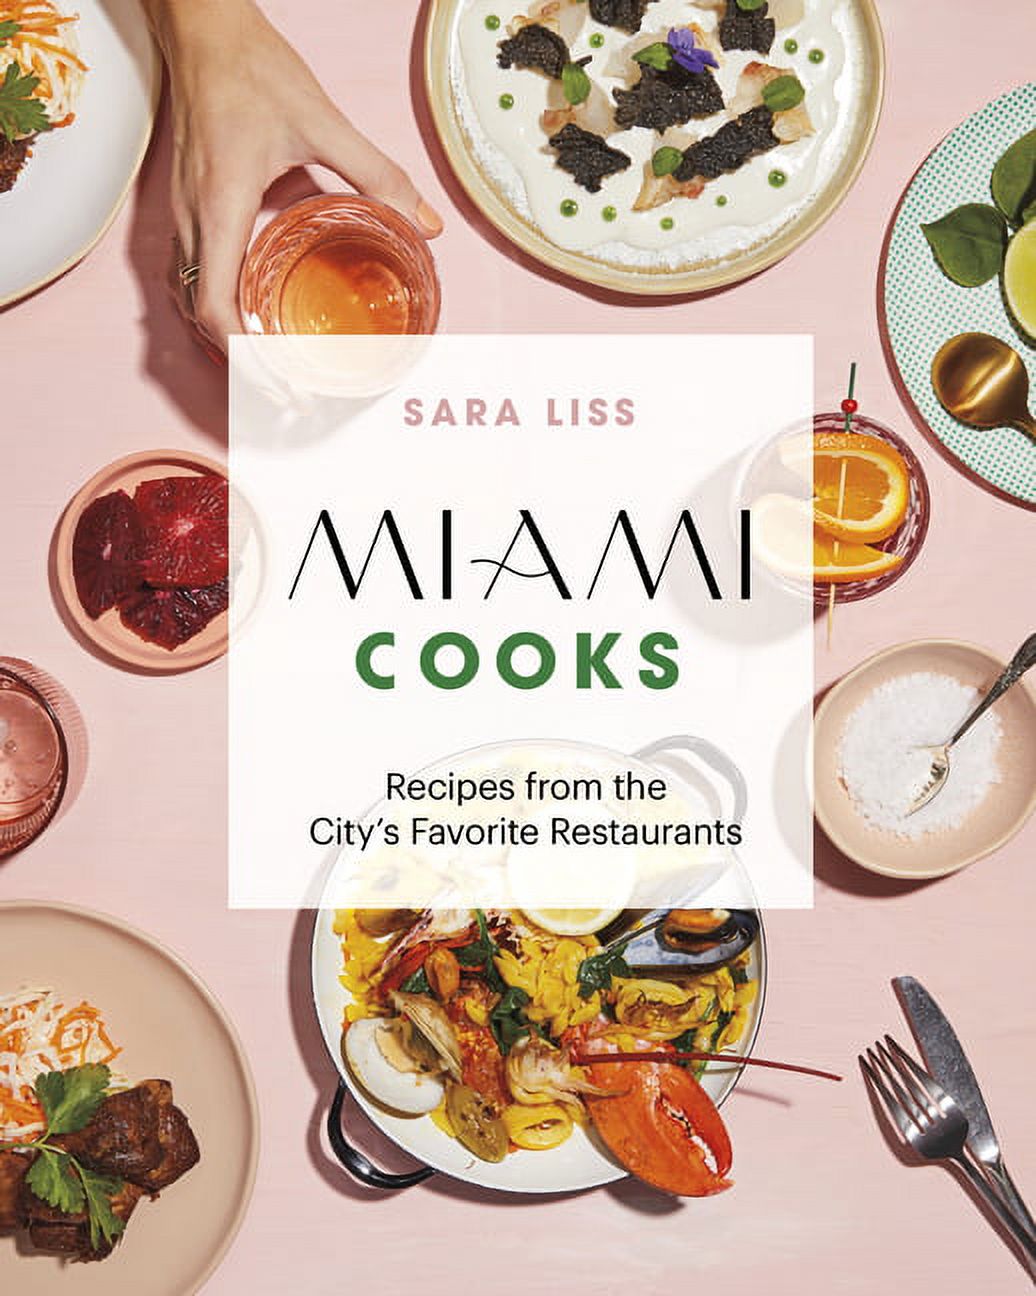 Miami Cooks: Recipes from the City's Favorite Restaurants (Hardcover) - image 1 of 1